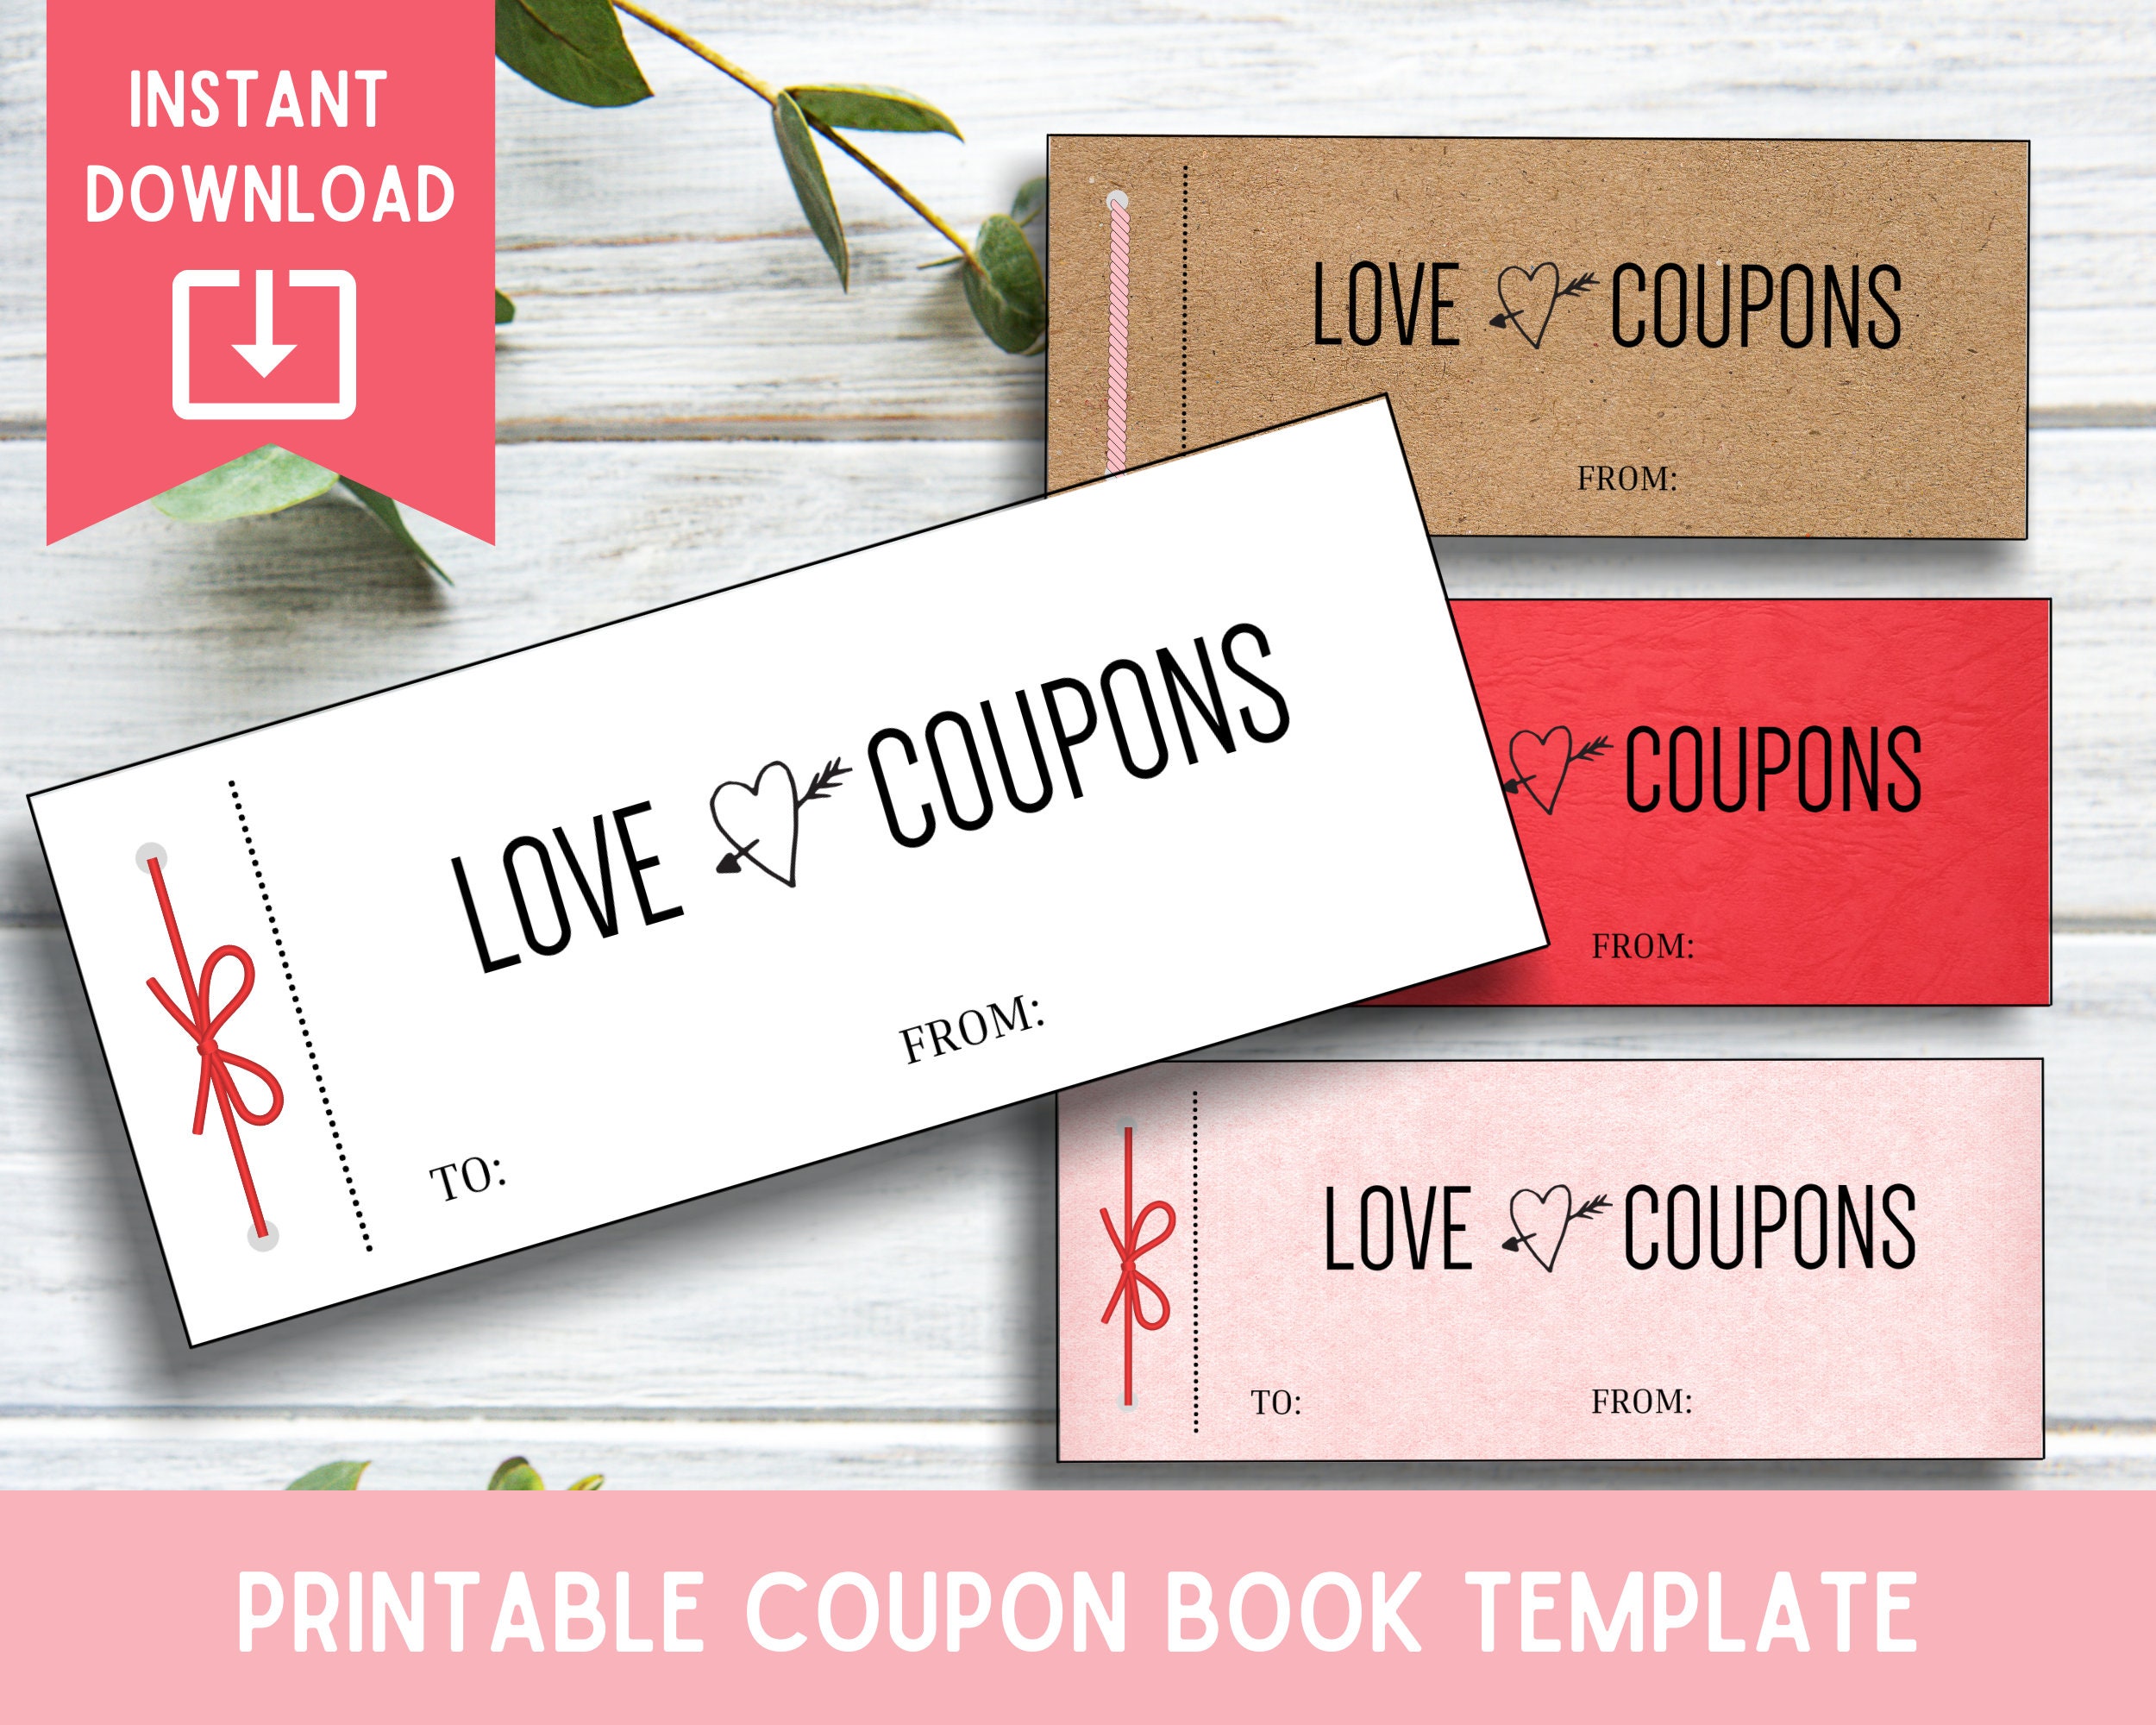 Printable Coupon Book Template, Printable Coupon Book Blank, Love Coupons  for Him, Love Coupons for Her, Boyfriend Coupons, Black and White Intended For Blank Coupon Template Printable